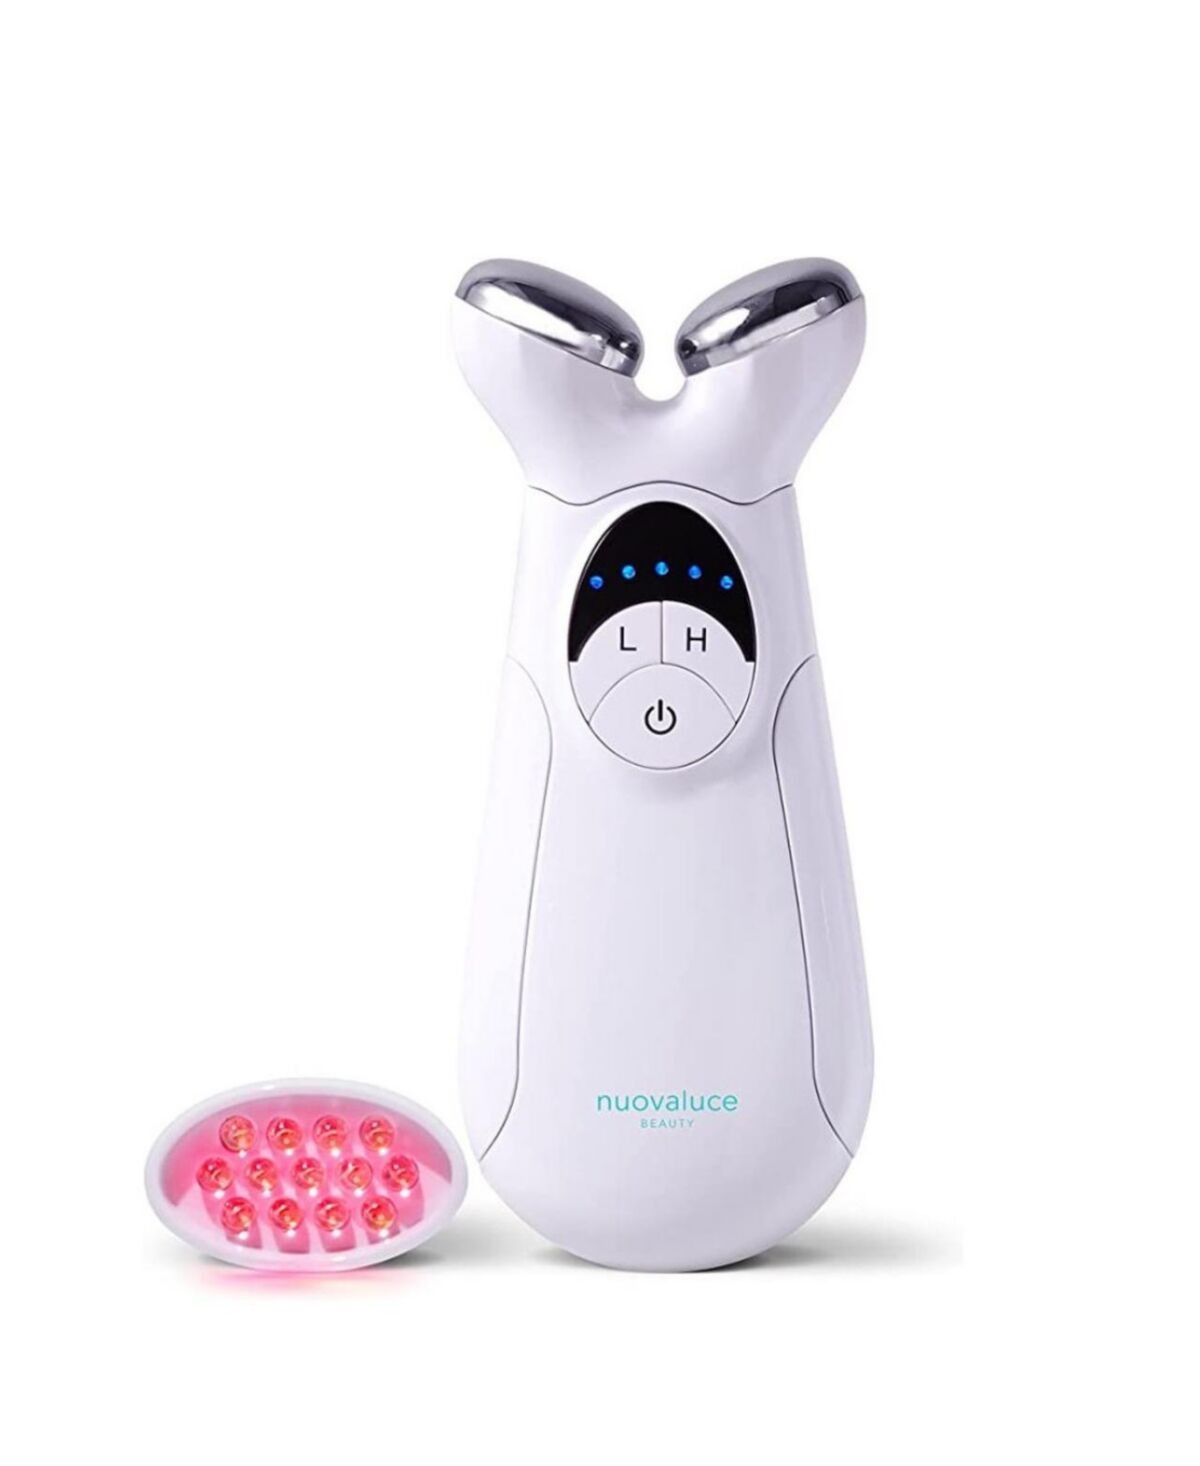 Nuovaluce Beauty 2 in 1 Anti-Aging Led Light Therapy & Microcurrent Facial Device - Wrinkle Eraser & Skin Smoothing Tool - Handheld Skincare Tool for